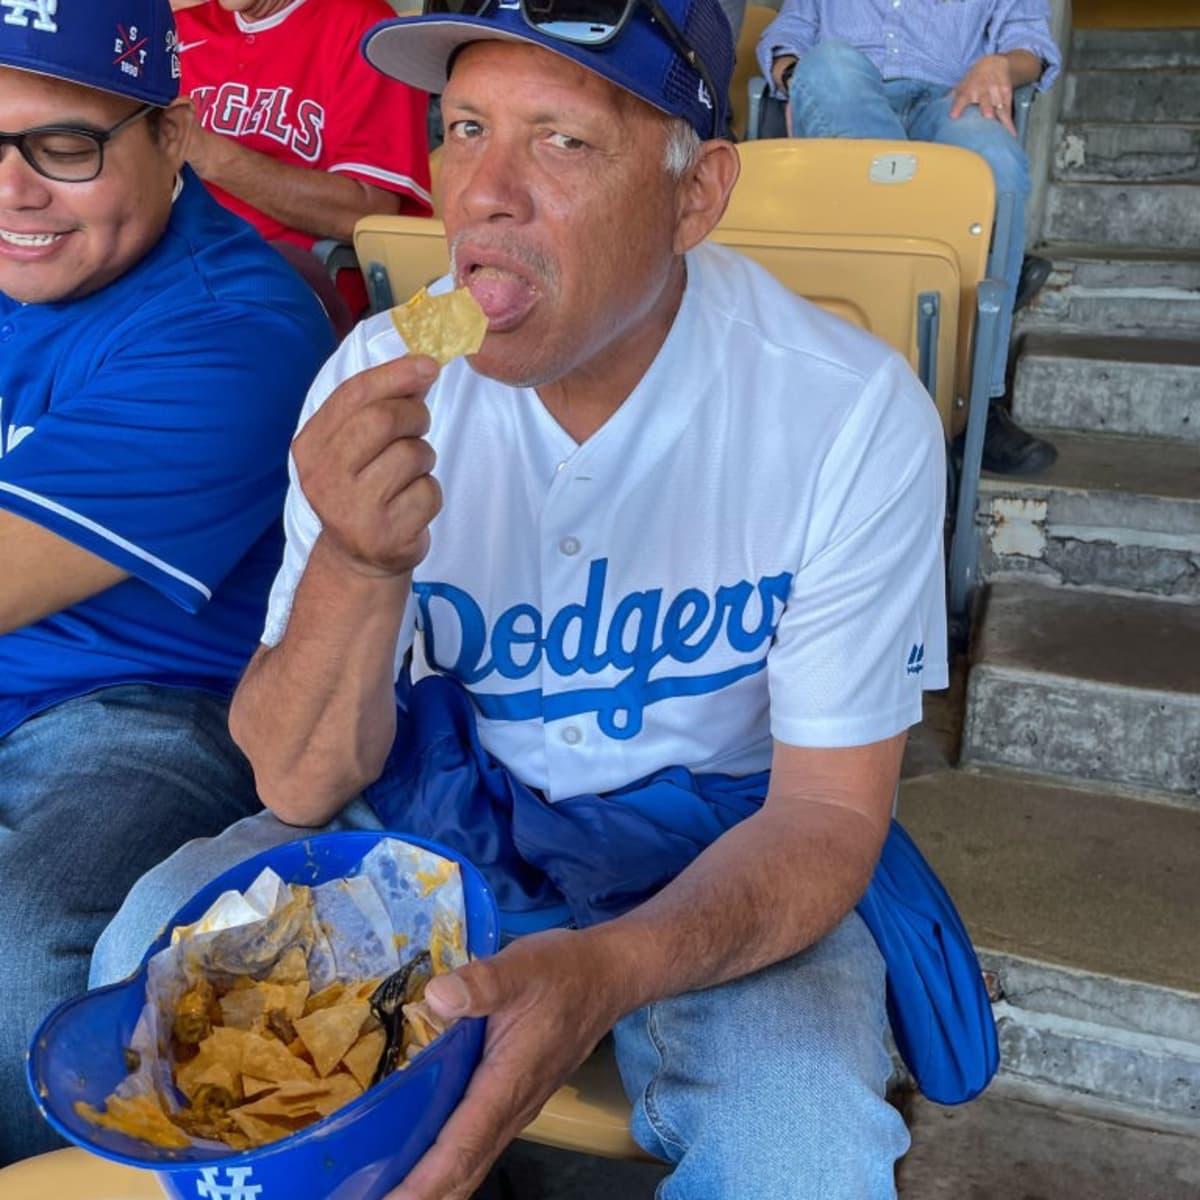 Workers at Dodger Stadium threaten to strike days before 2022 MLB All-Star  Game : NPR